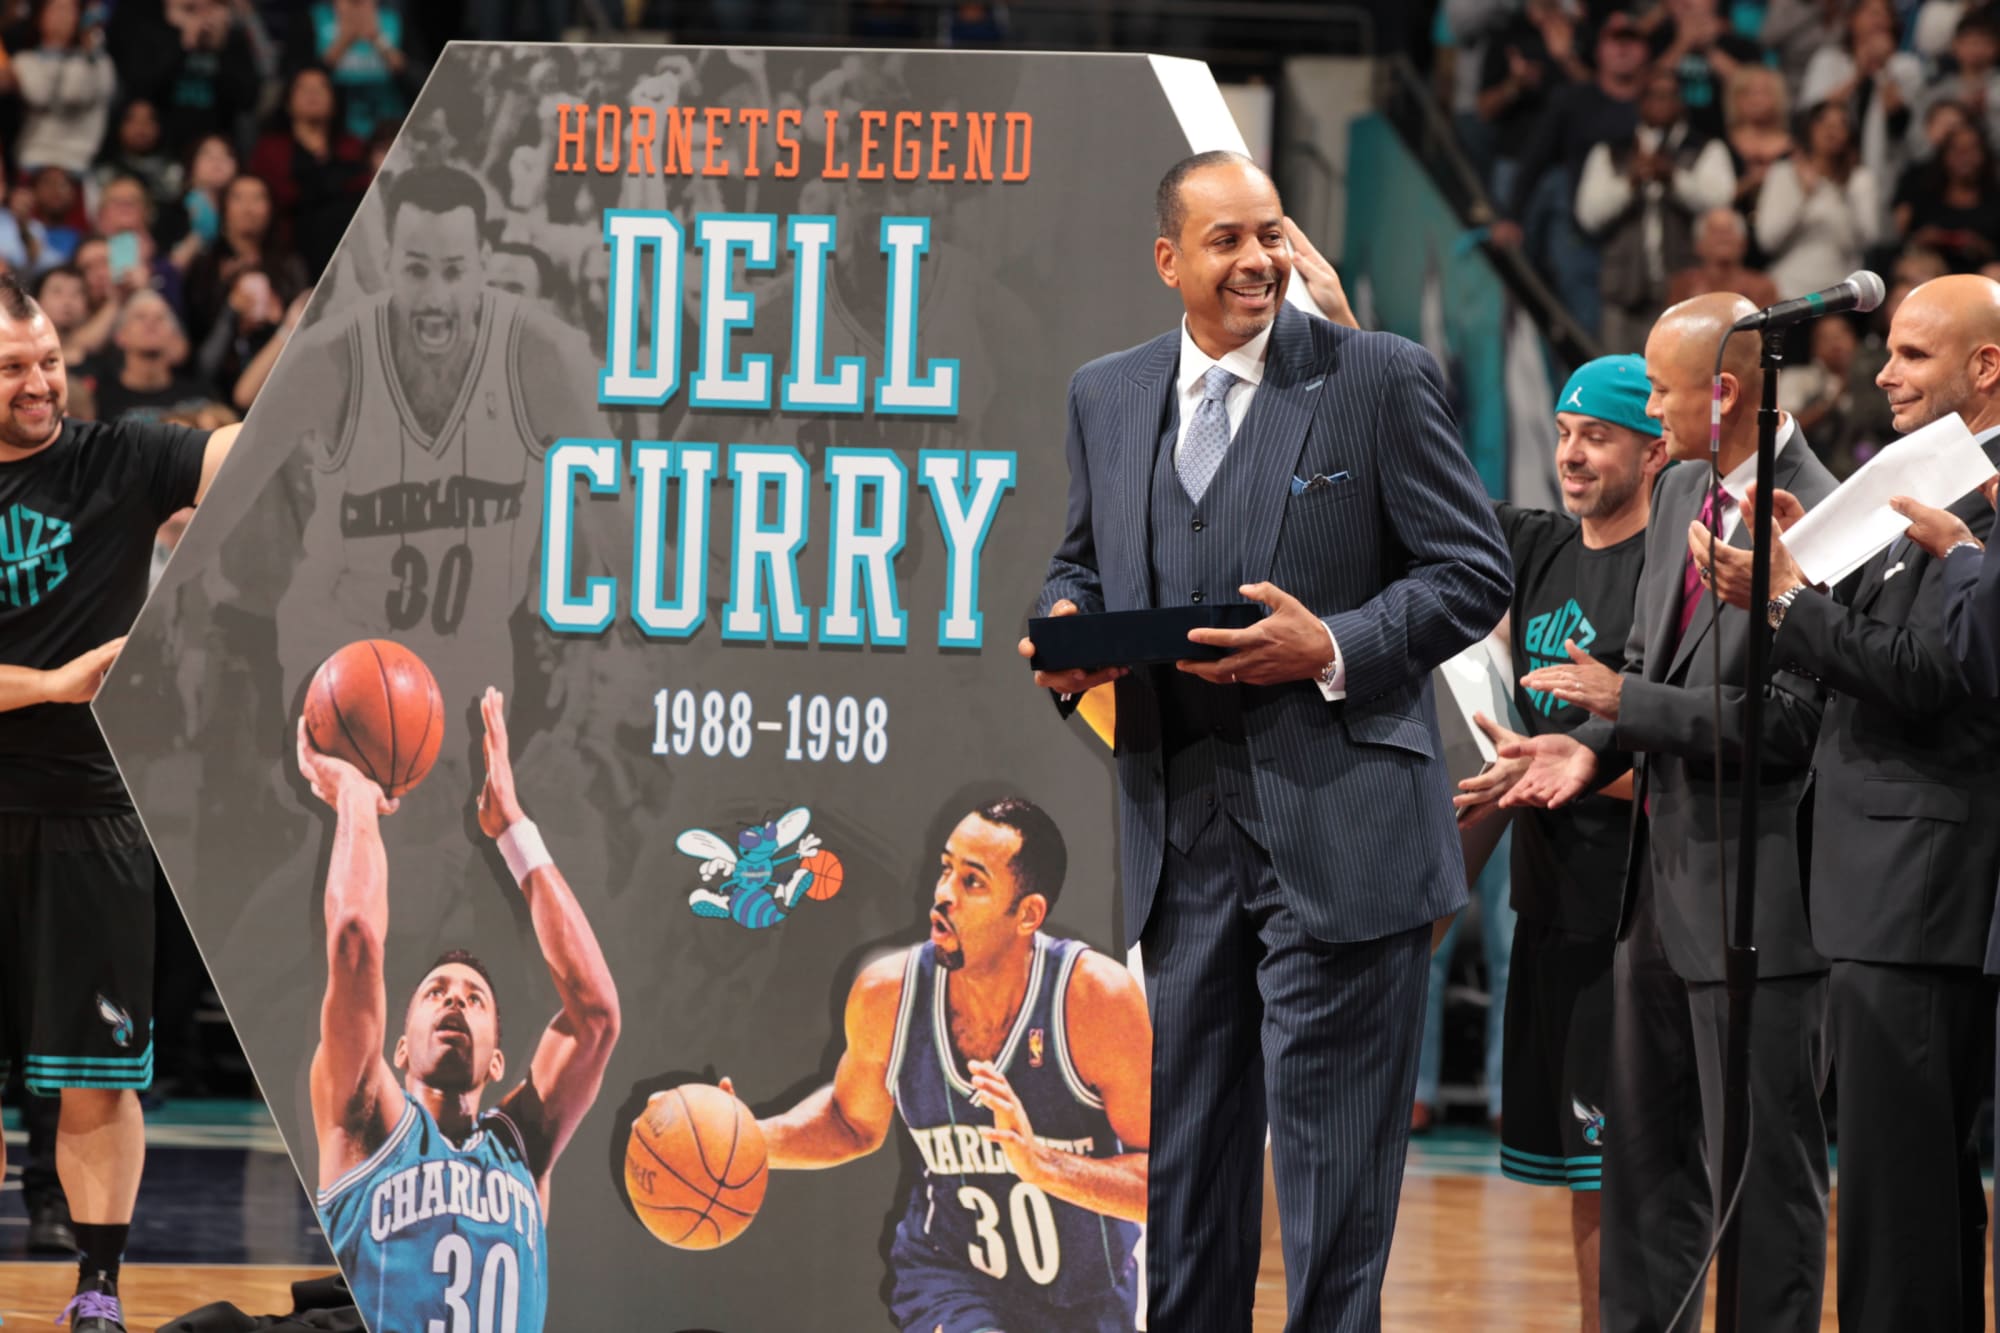 Dell curry